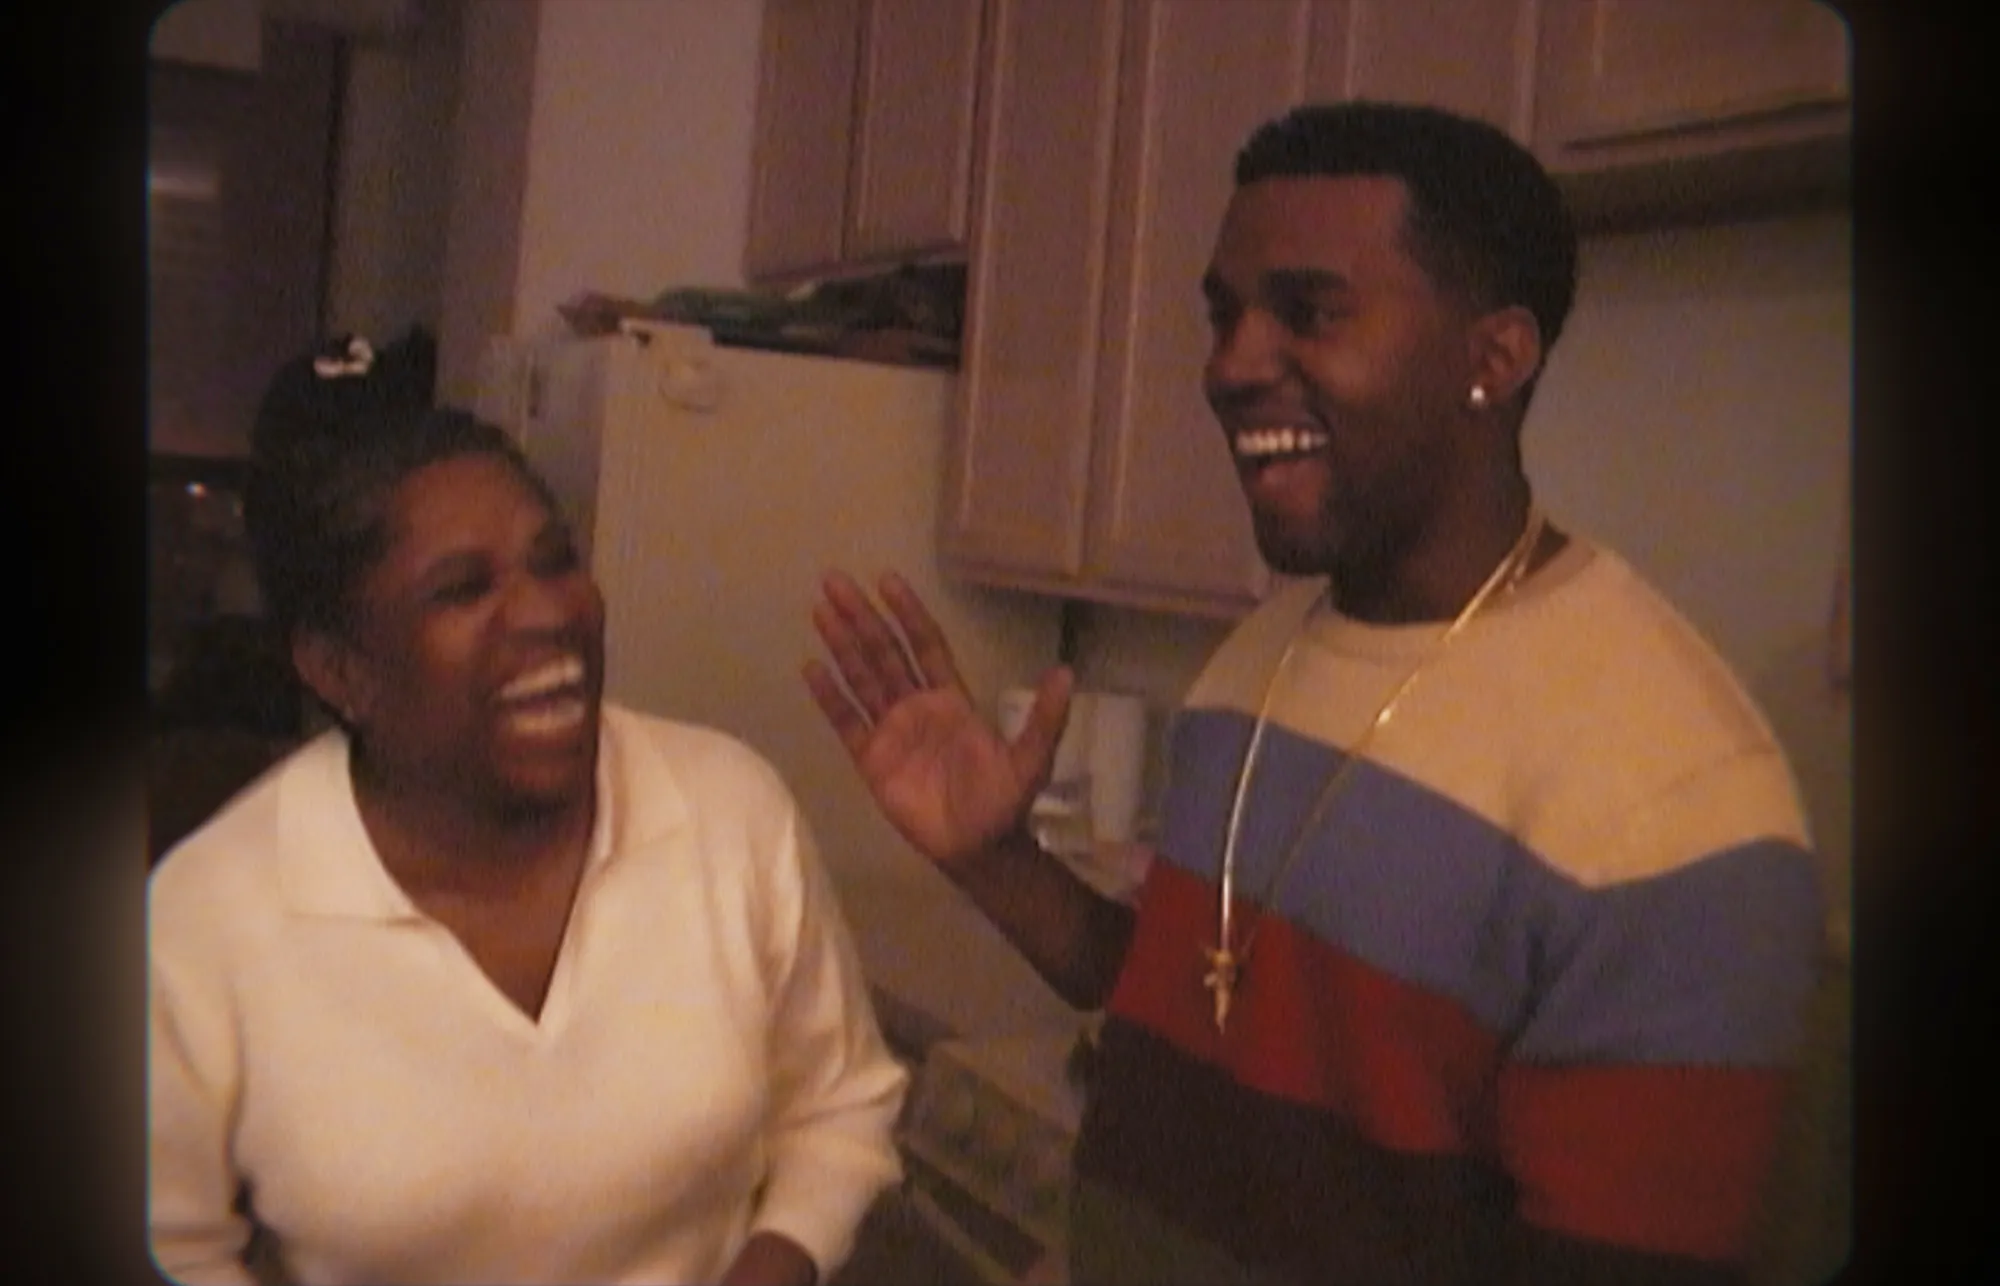 Kanye West and his mother Donda smiling and laughing together.